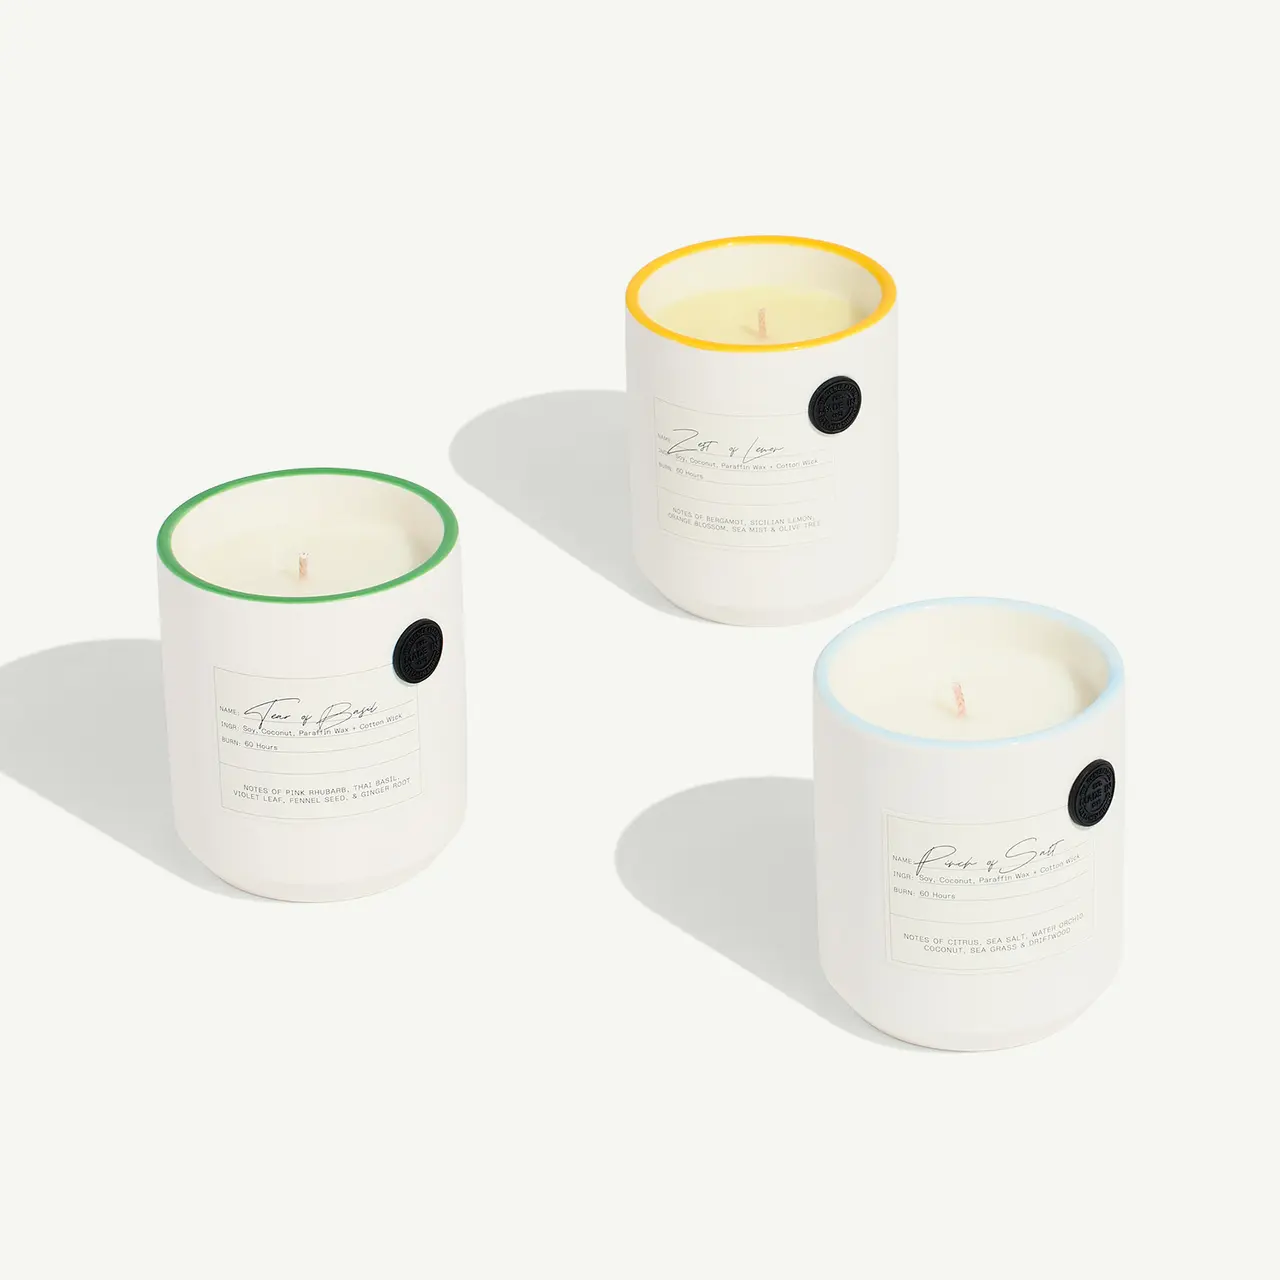 Three scented candles with different colored wax sit in a line casting soft shadows on a light background.